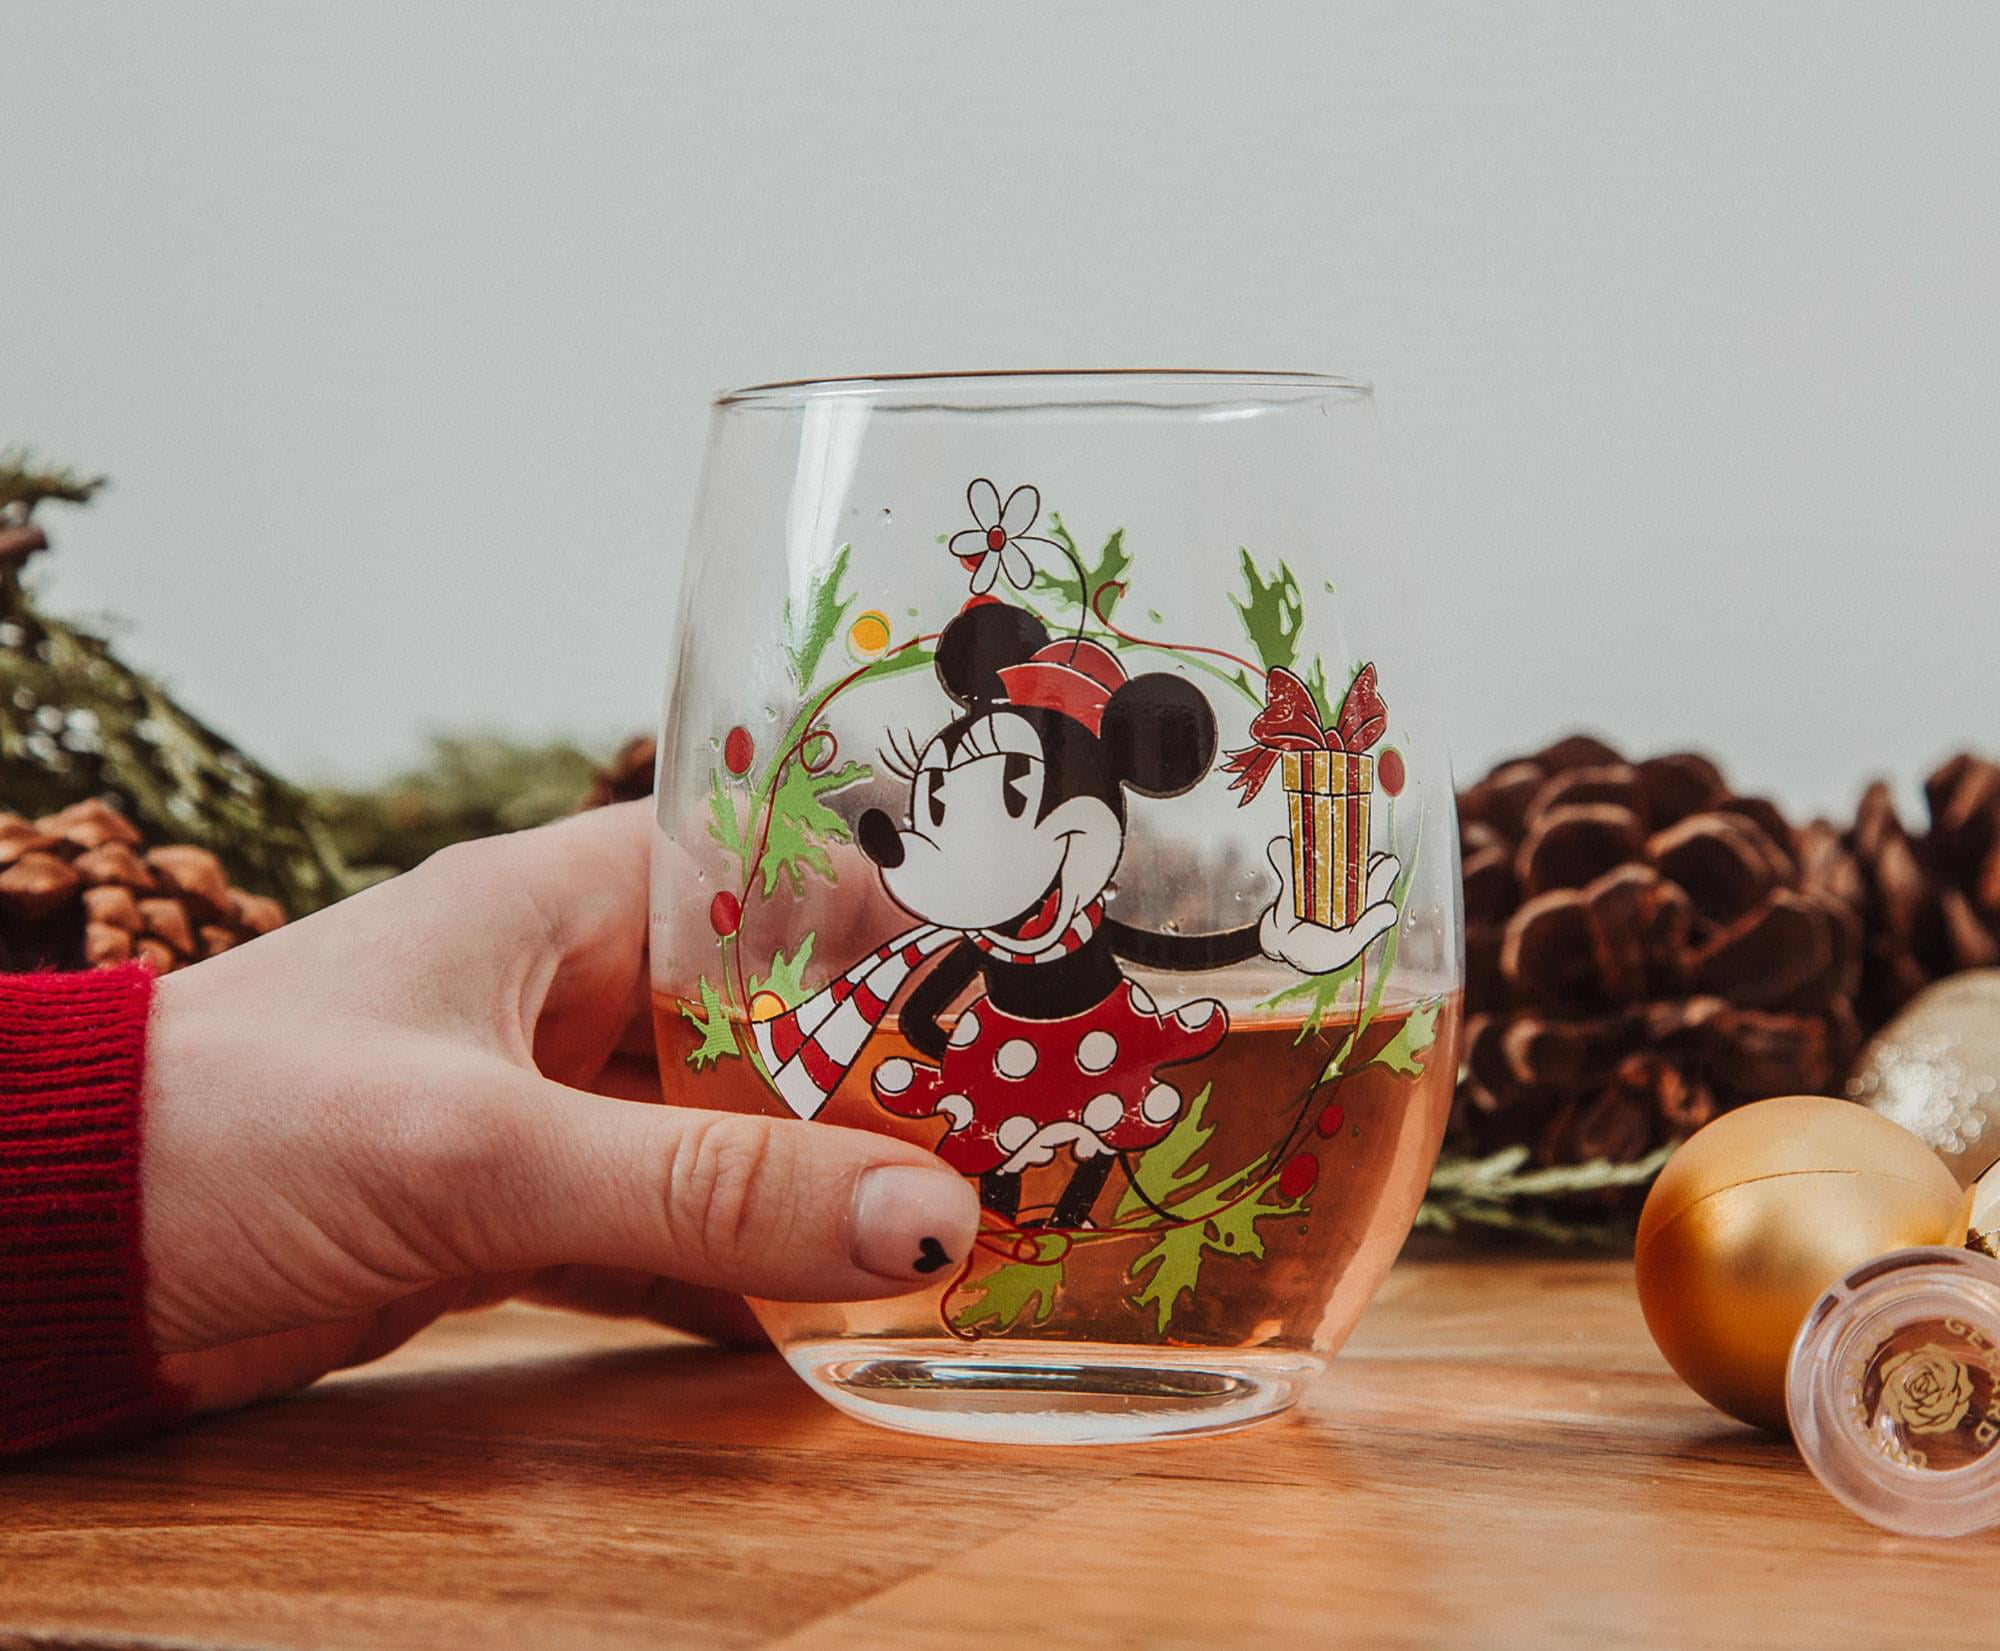 Disney Mickey Mouse Christmas Wreath Stemless Wine Glass | Holds 20 Ounces